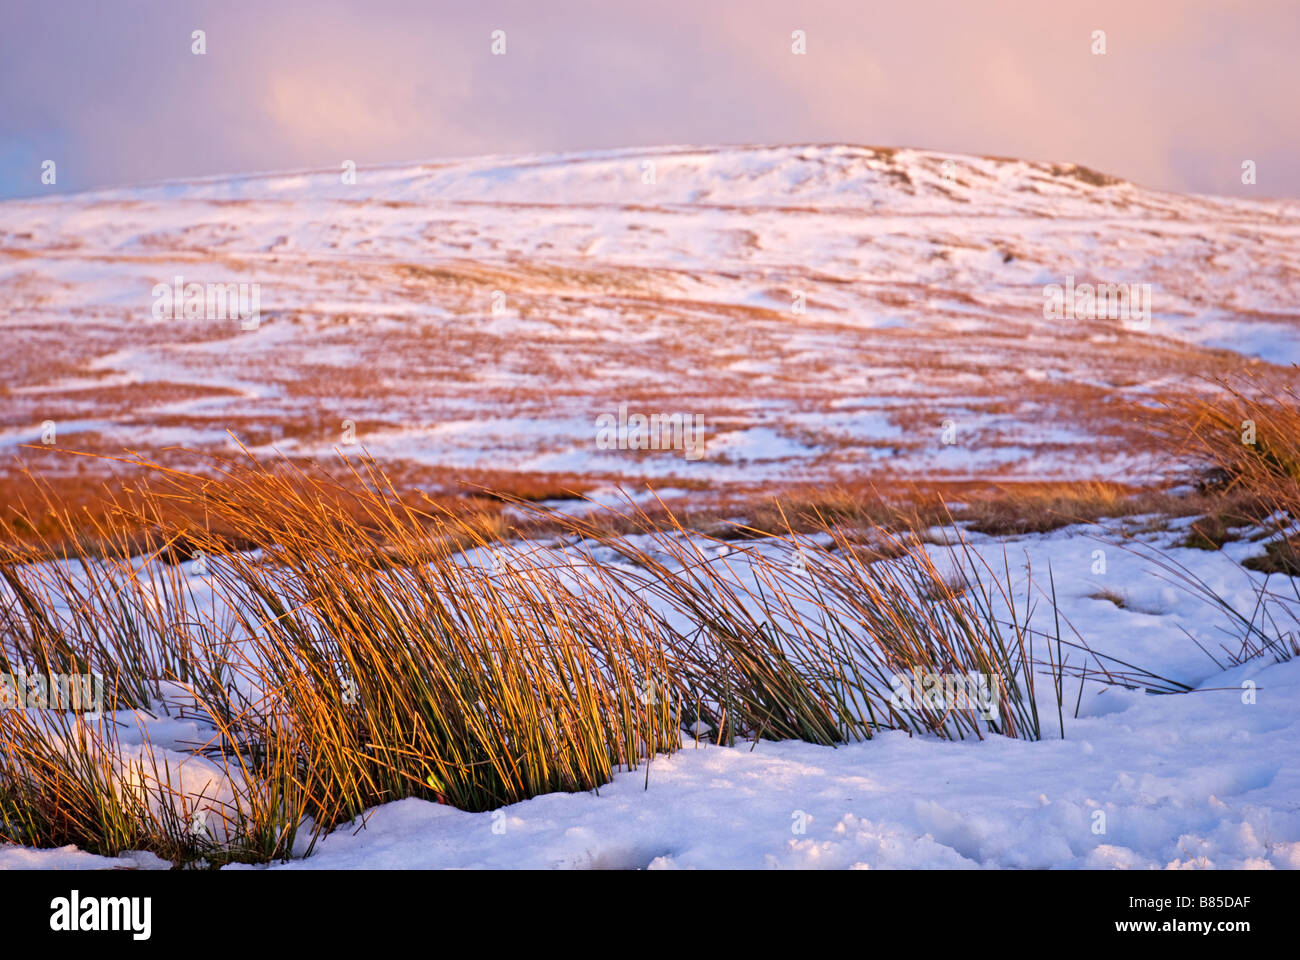 A view of Lovely Seat in winter Stock Photo